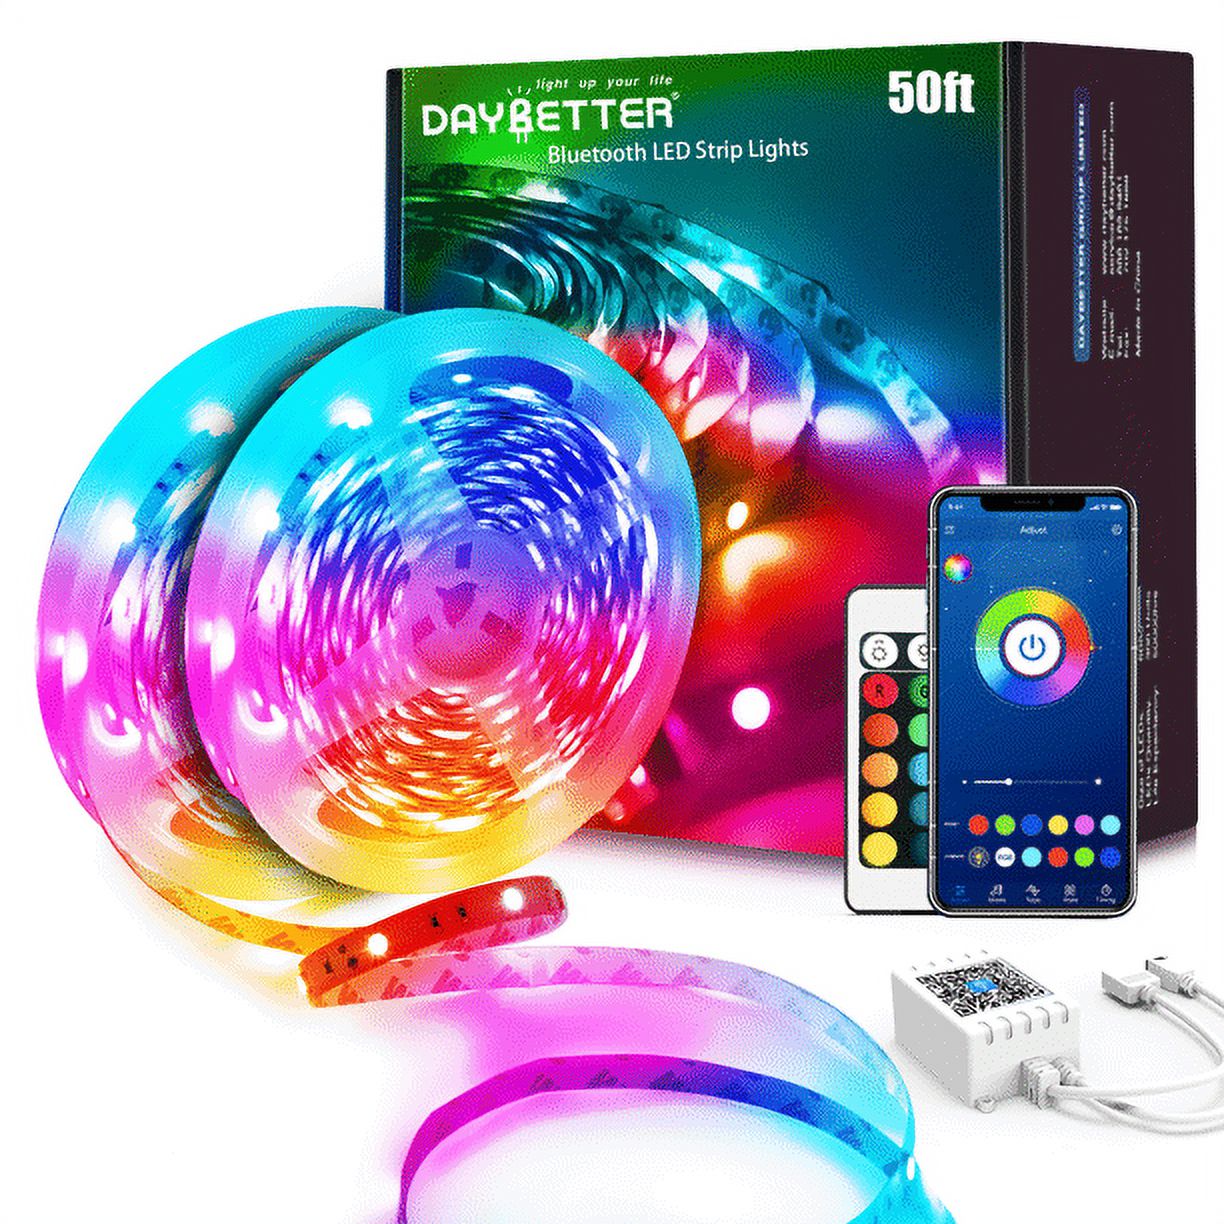 DAYBETTER 50ft Bluetooth LED Strip Lights,Music Sync 5050 LED Light Strip RGB with Remote Control,Timer Schedule,Color Changing LED Lights for Bedroom